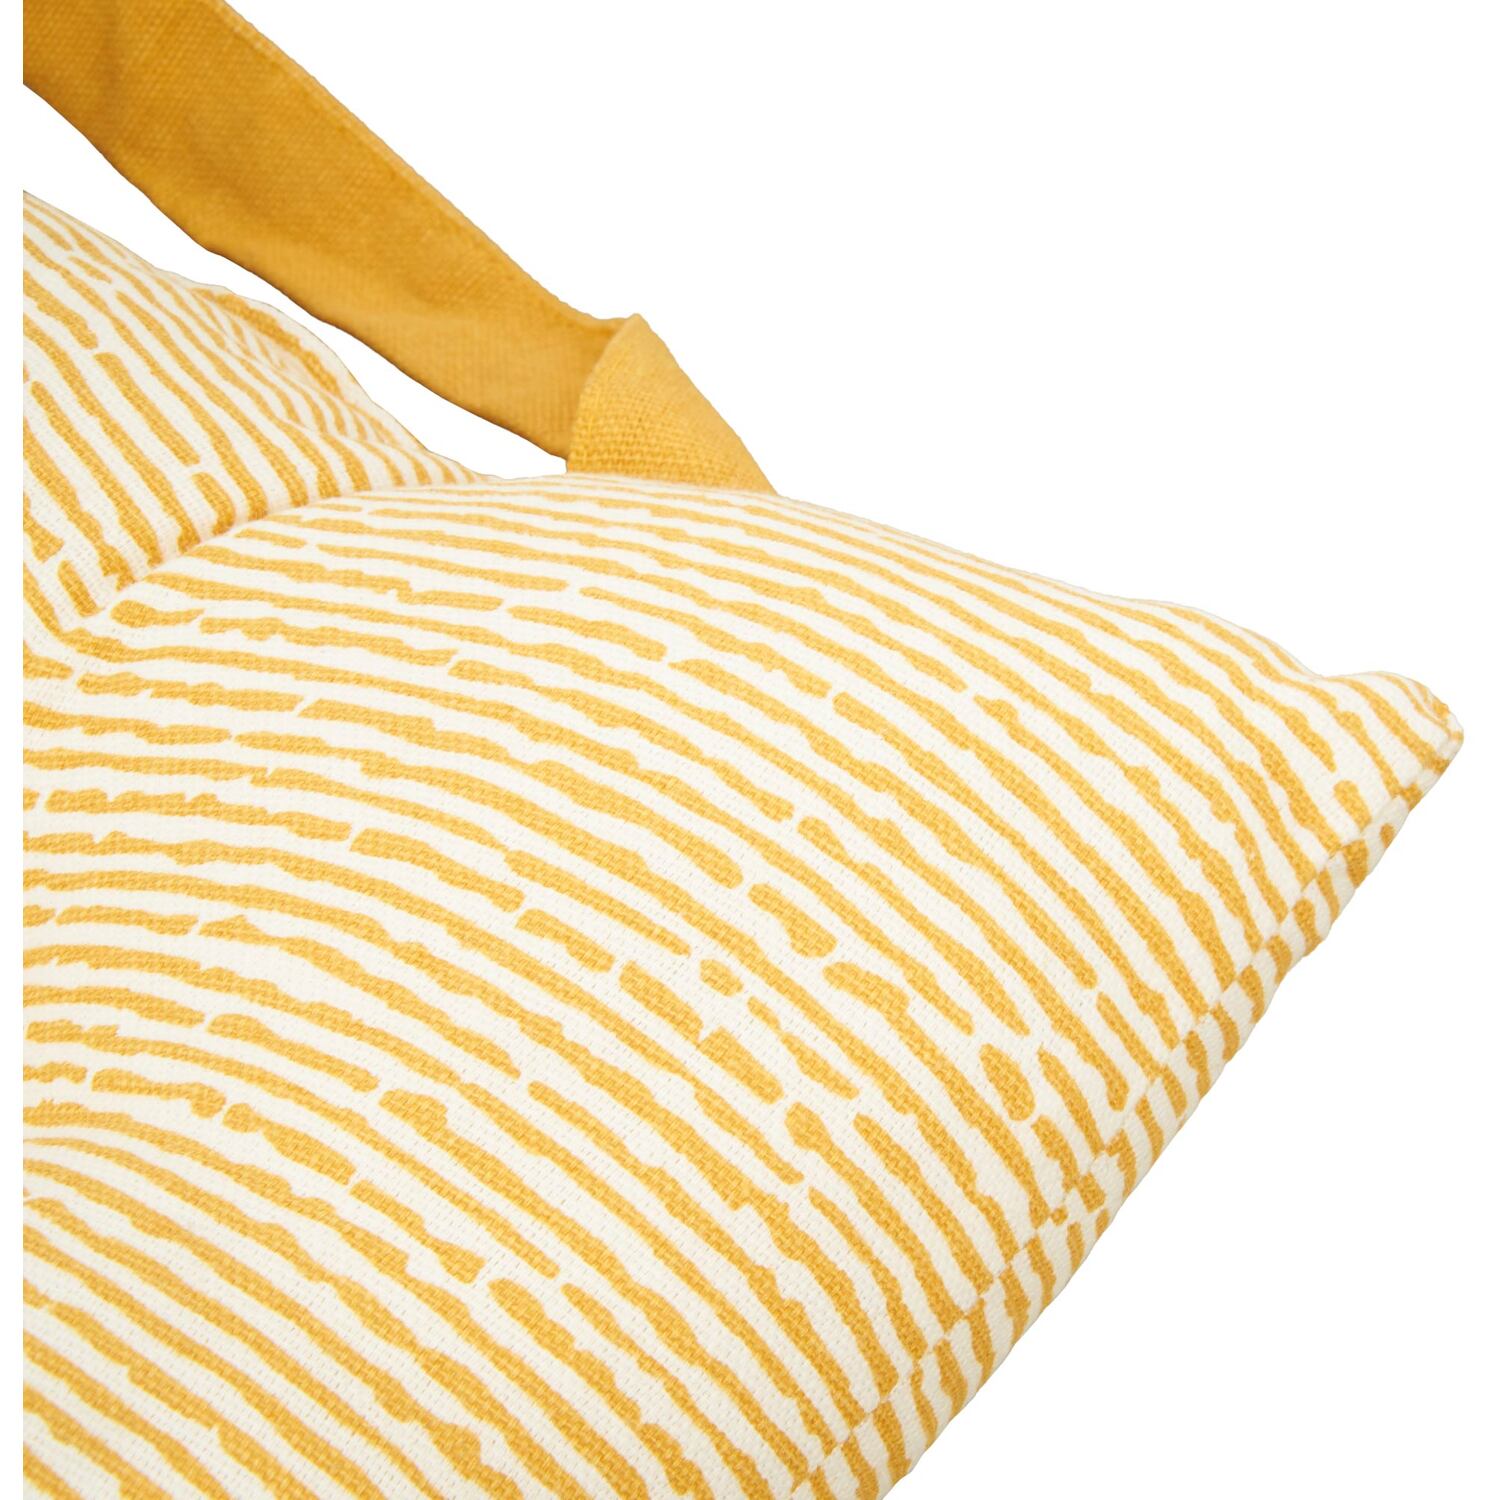 Printed Seat Pad with Handle - Yellow Image 3